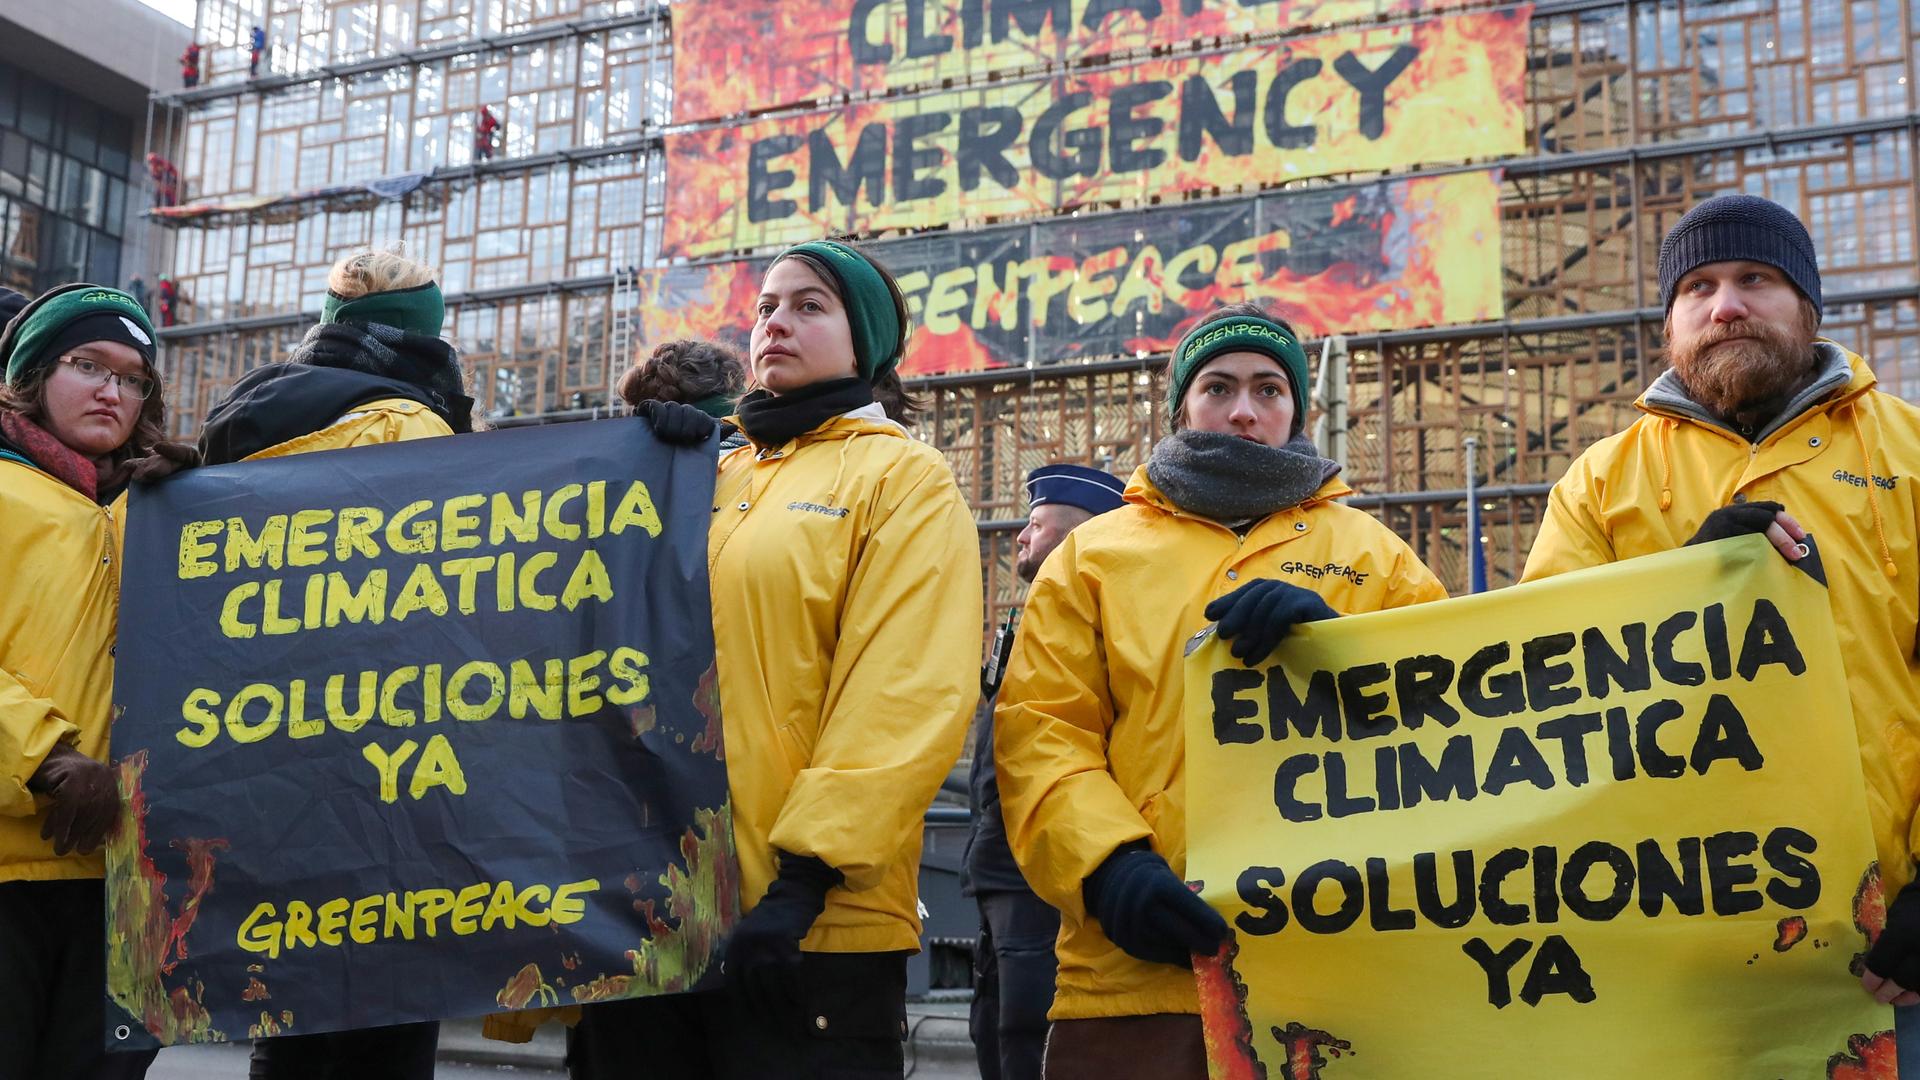 Protesters wear yellow jackets and sign that speak of climate emergency in Spanish language 